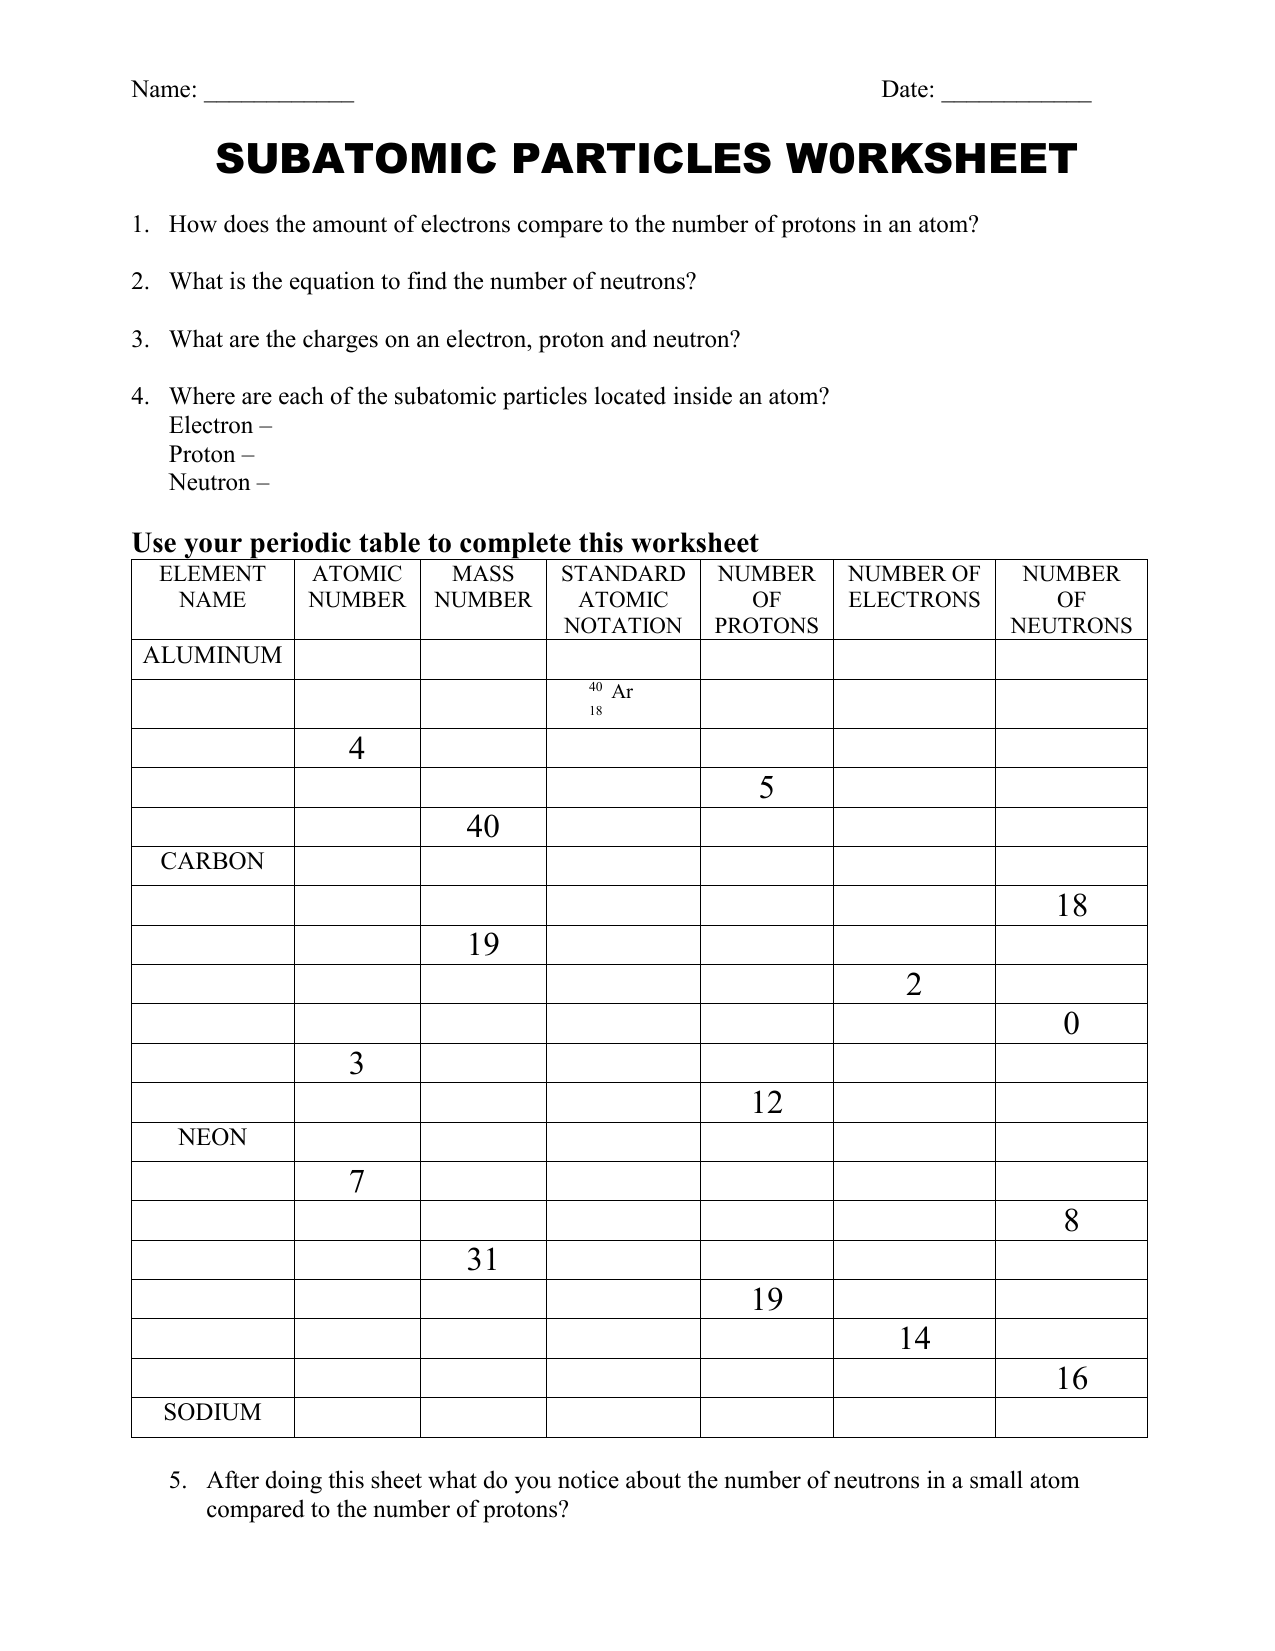 subatomic particles w11rksheet With Subatomic Particles Worksheet Answers